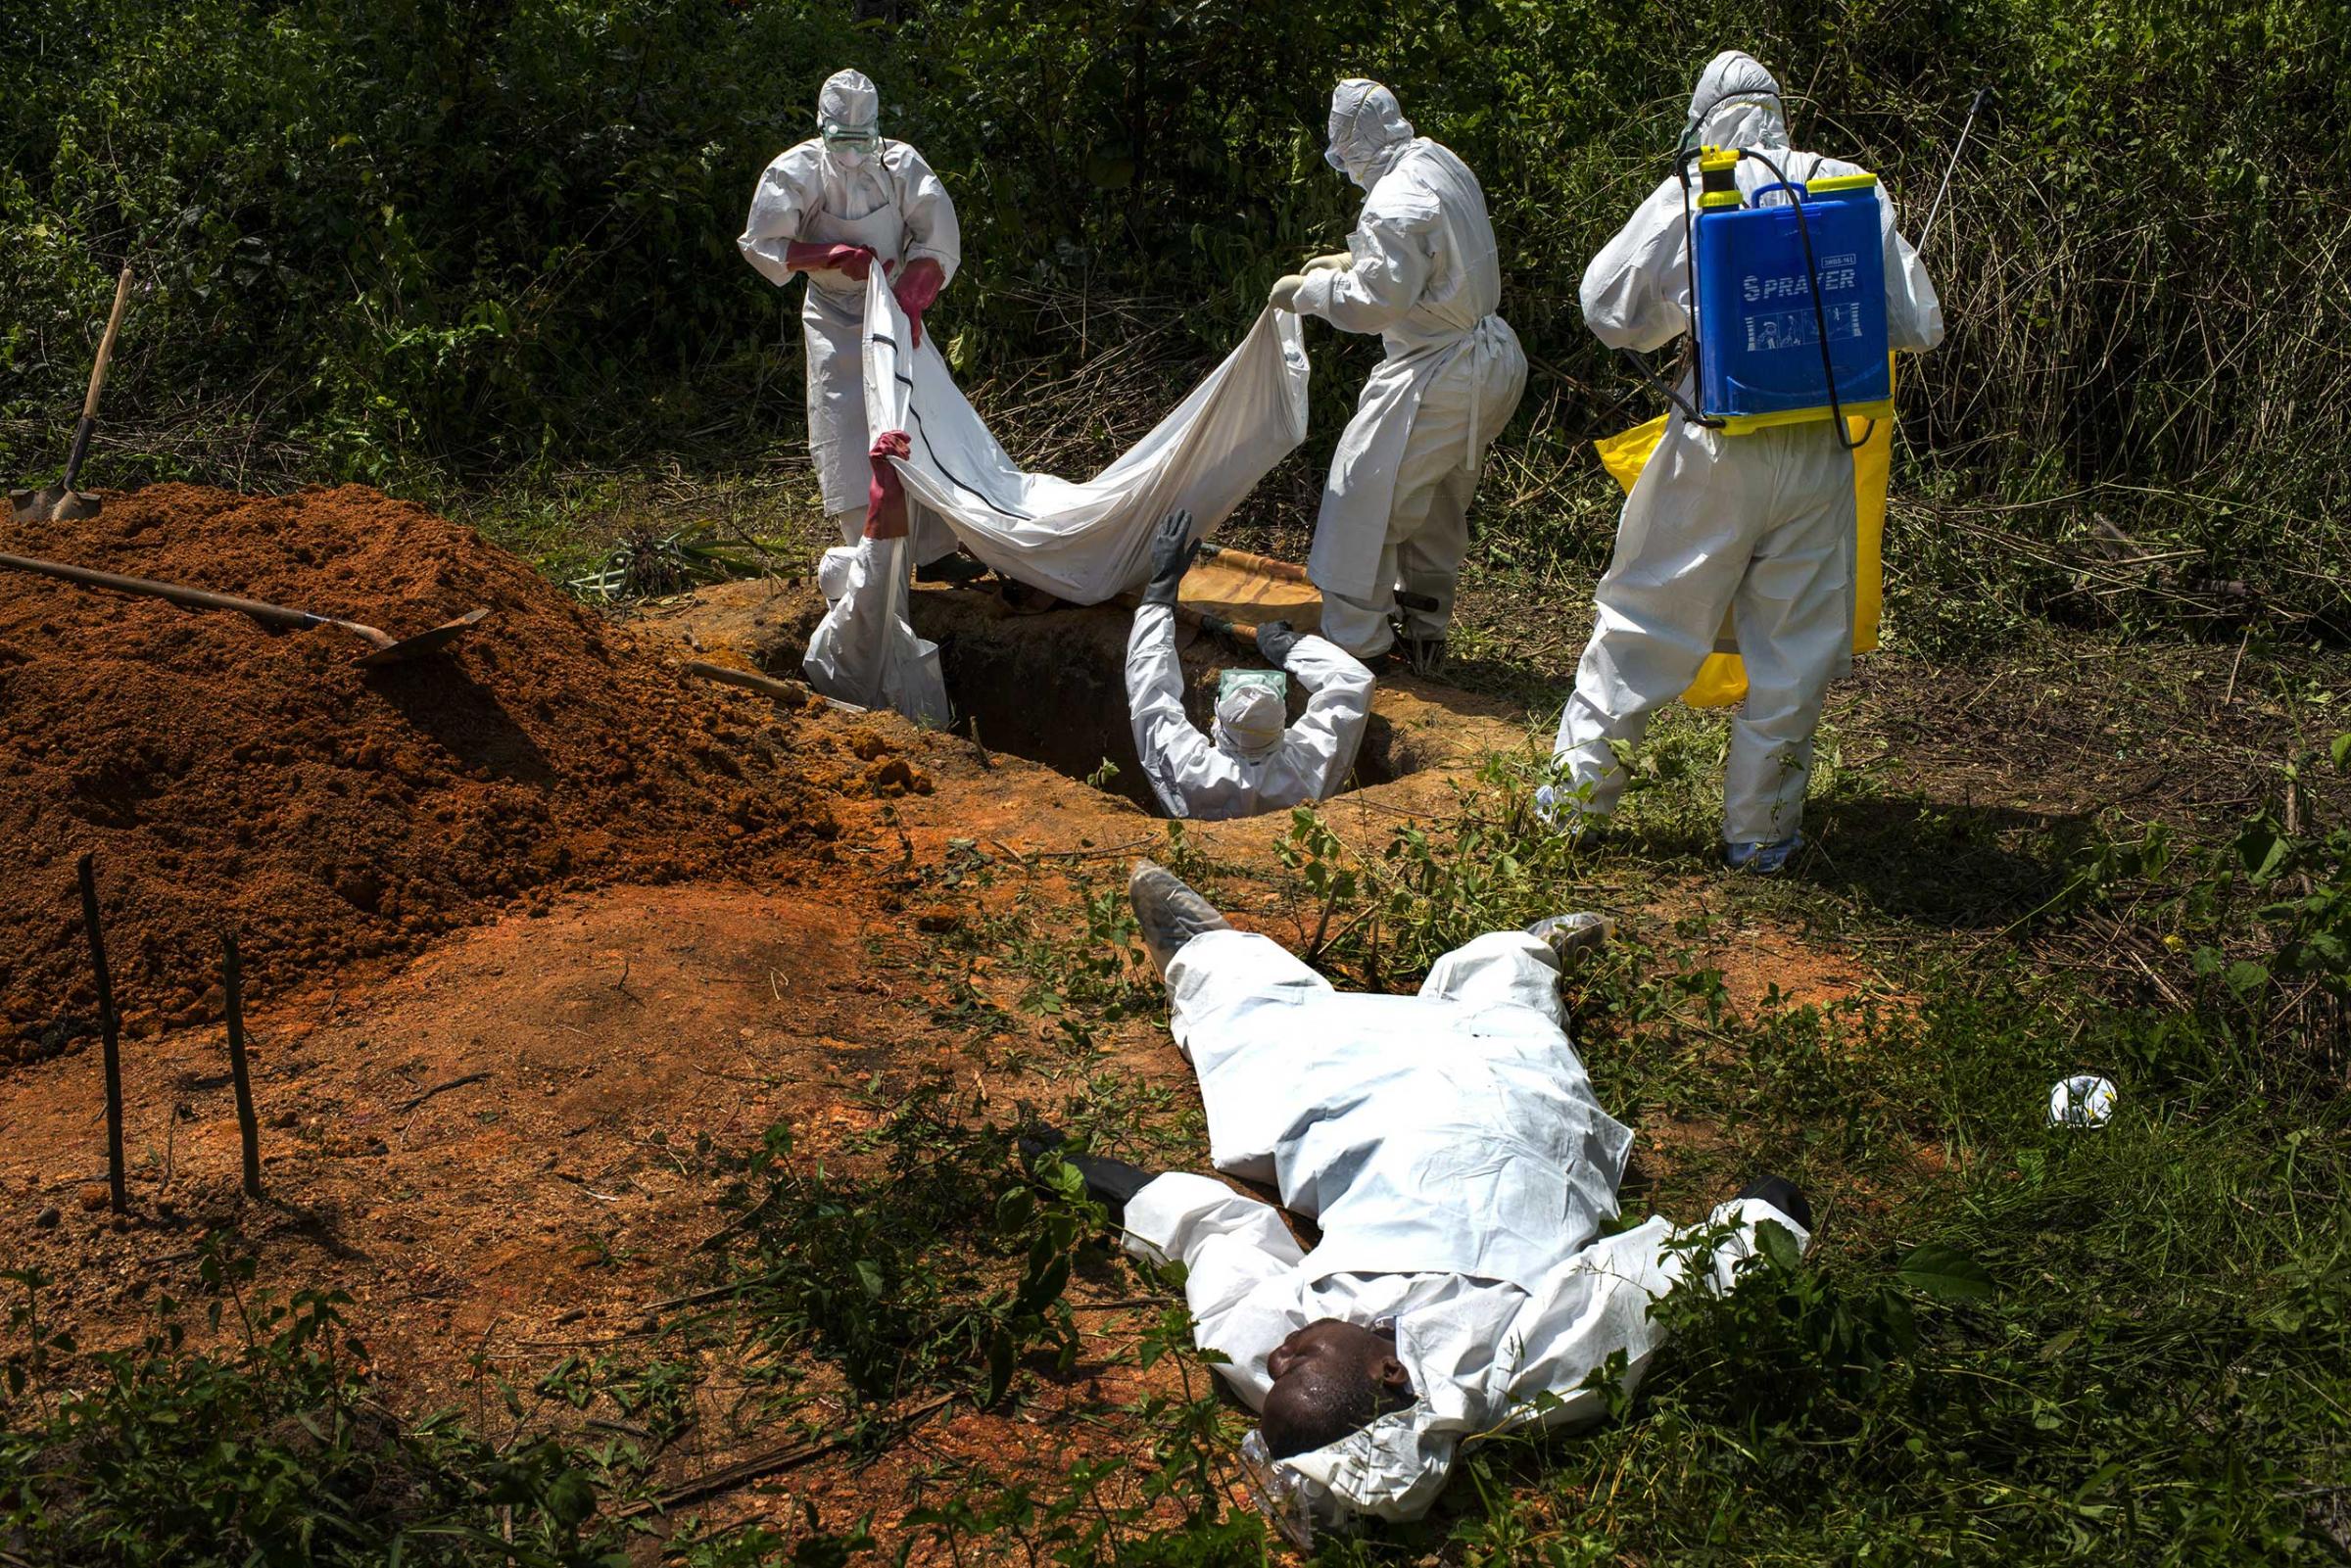 Alexander Morris lays flat on his back after fainted due to the extreme heat inside a protective suit while the Lofa County health department team buried his sister, on Nov. 7, 2014 in Voinjama, Liberia.